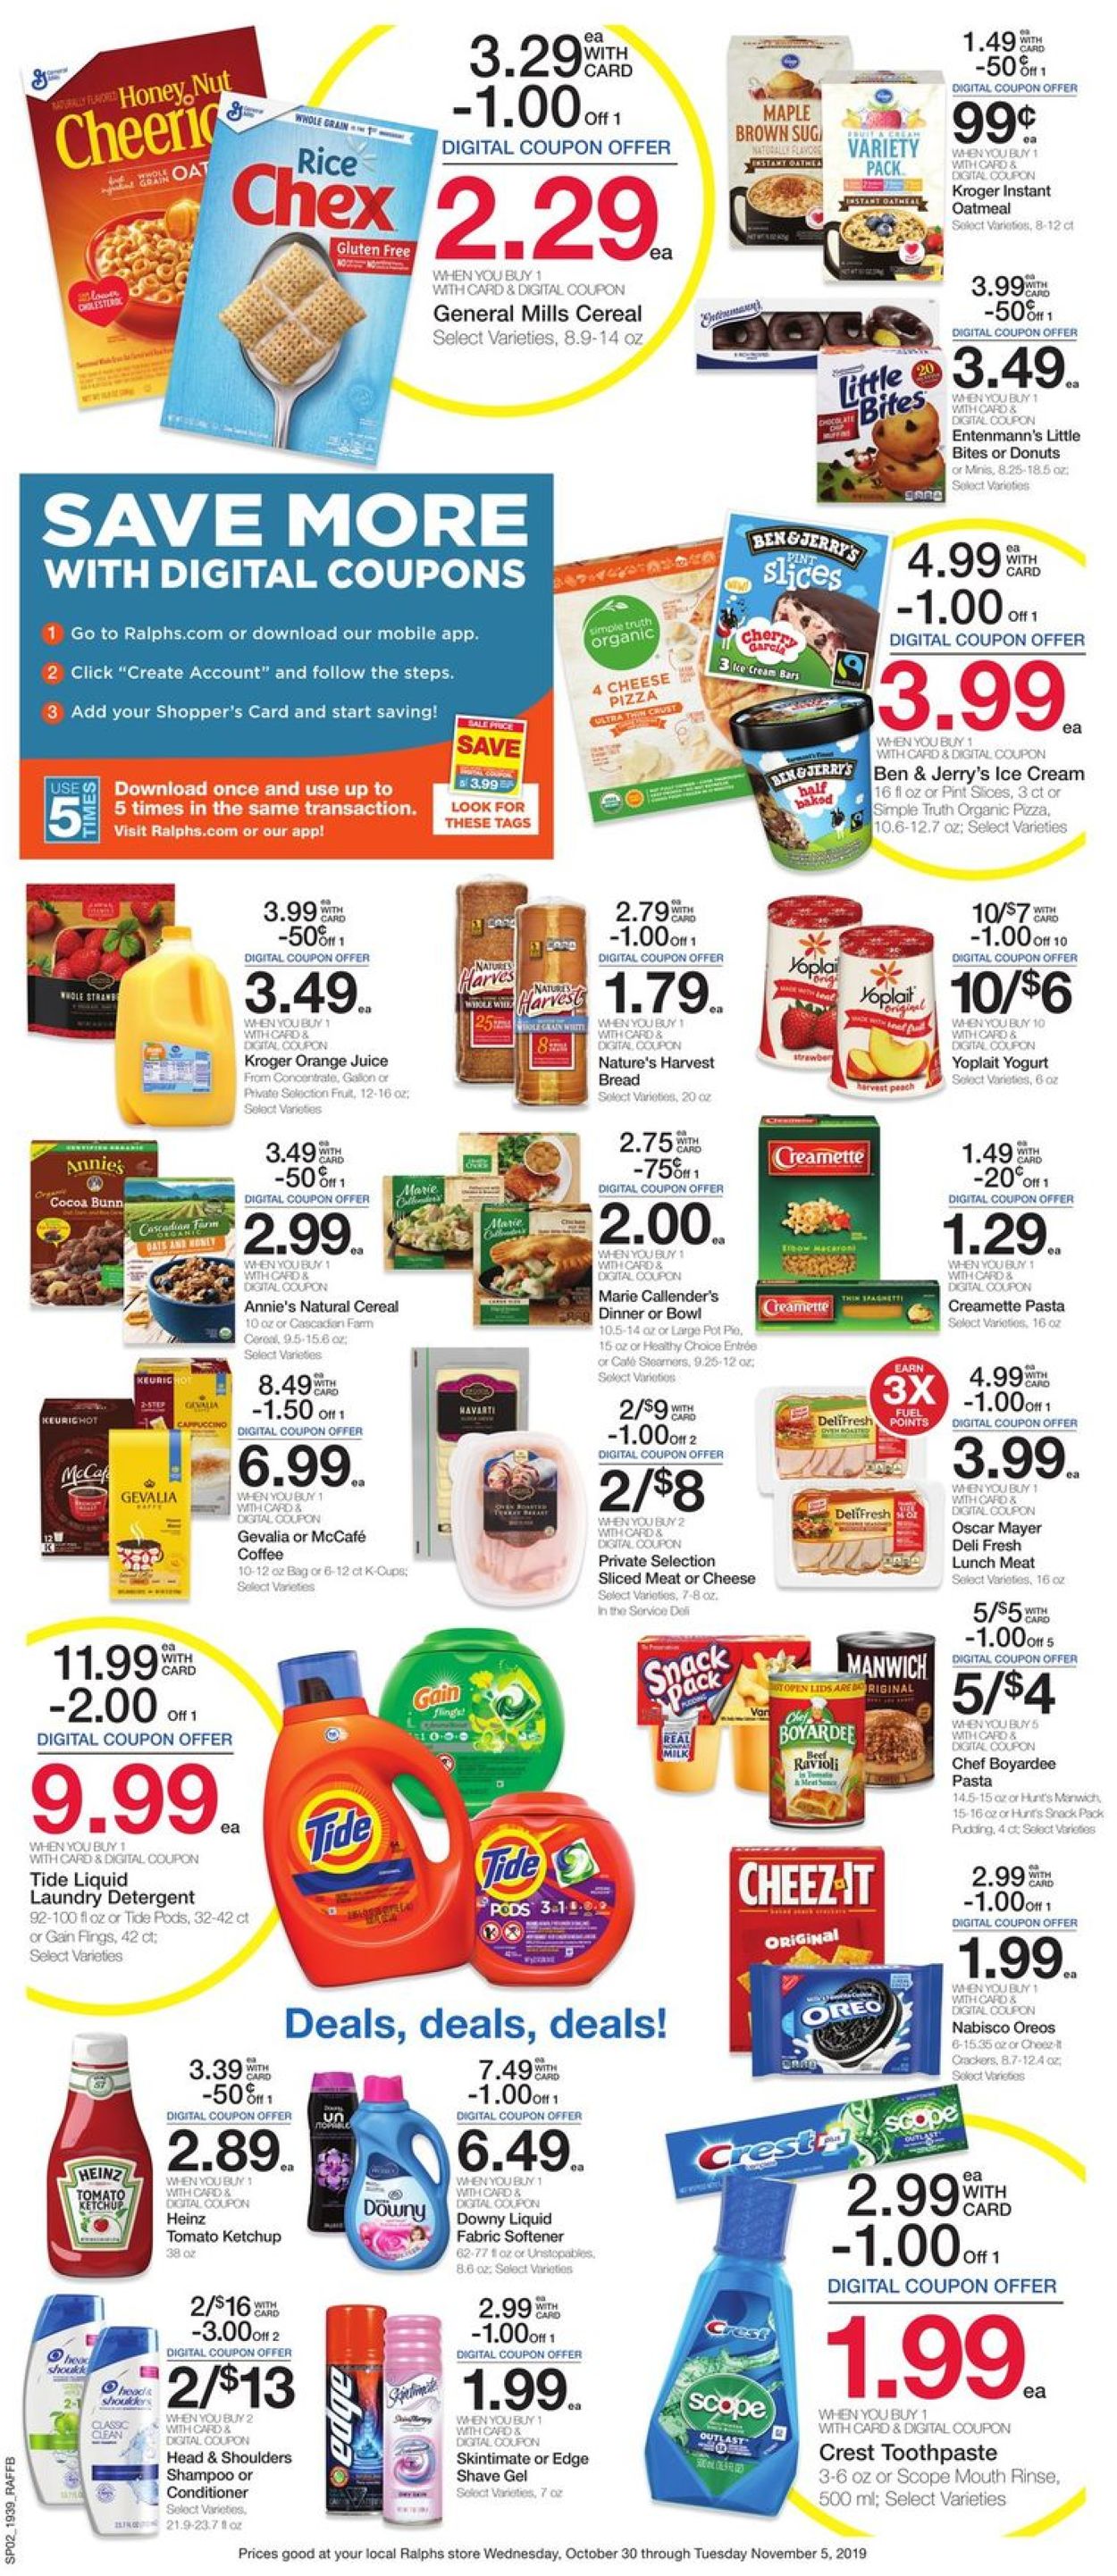 Ralphs Current weekly ad 10/30 - 11/05/2019 [3] - frequent-ads.com